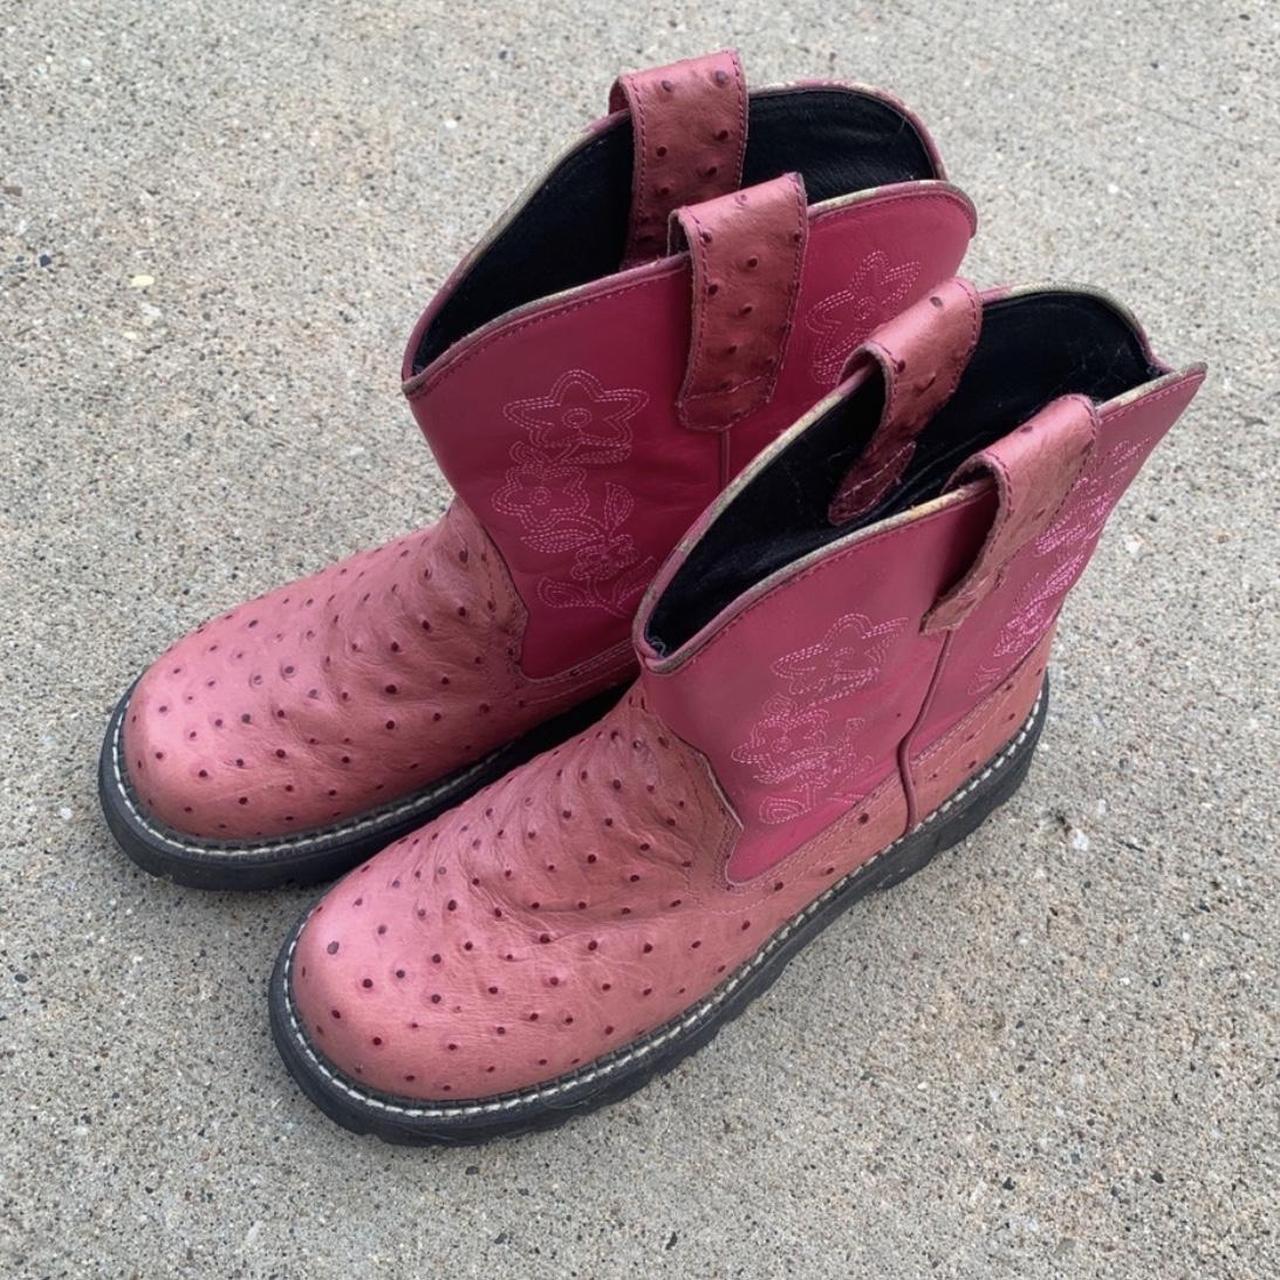 Pink Roper Cowboy Boots with Ostrich Style True to... - Depop